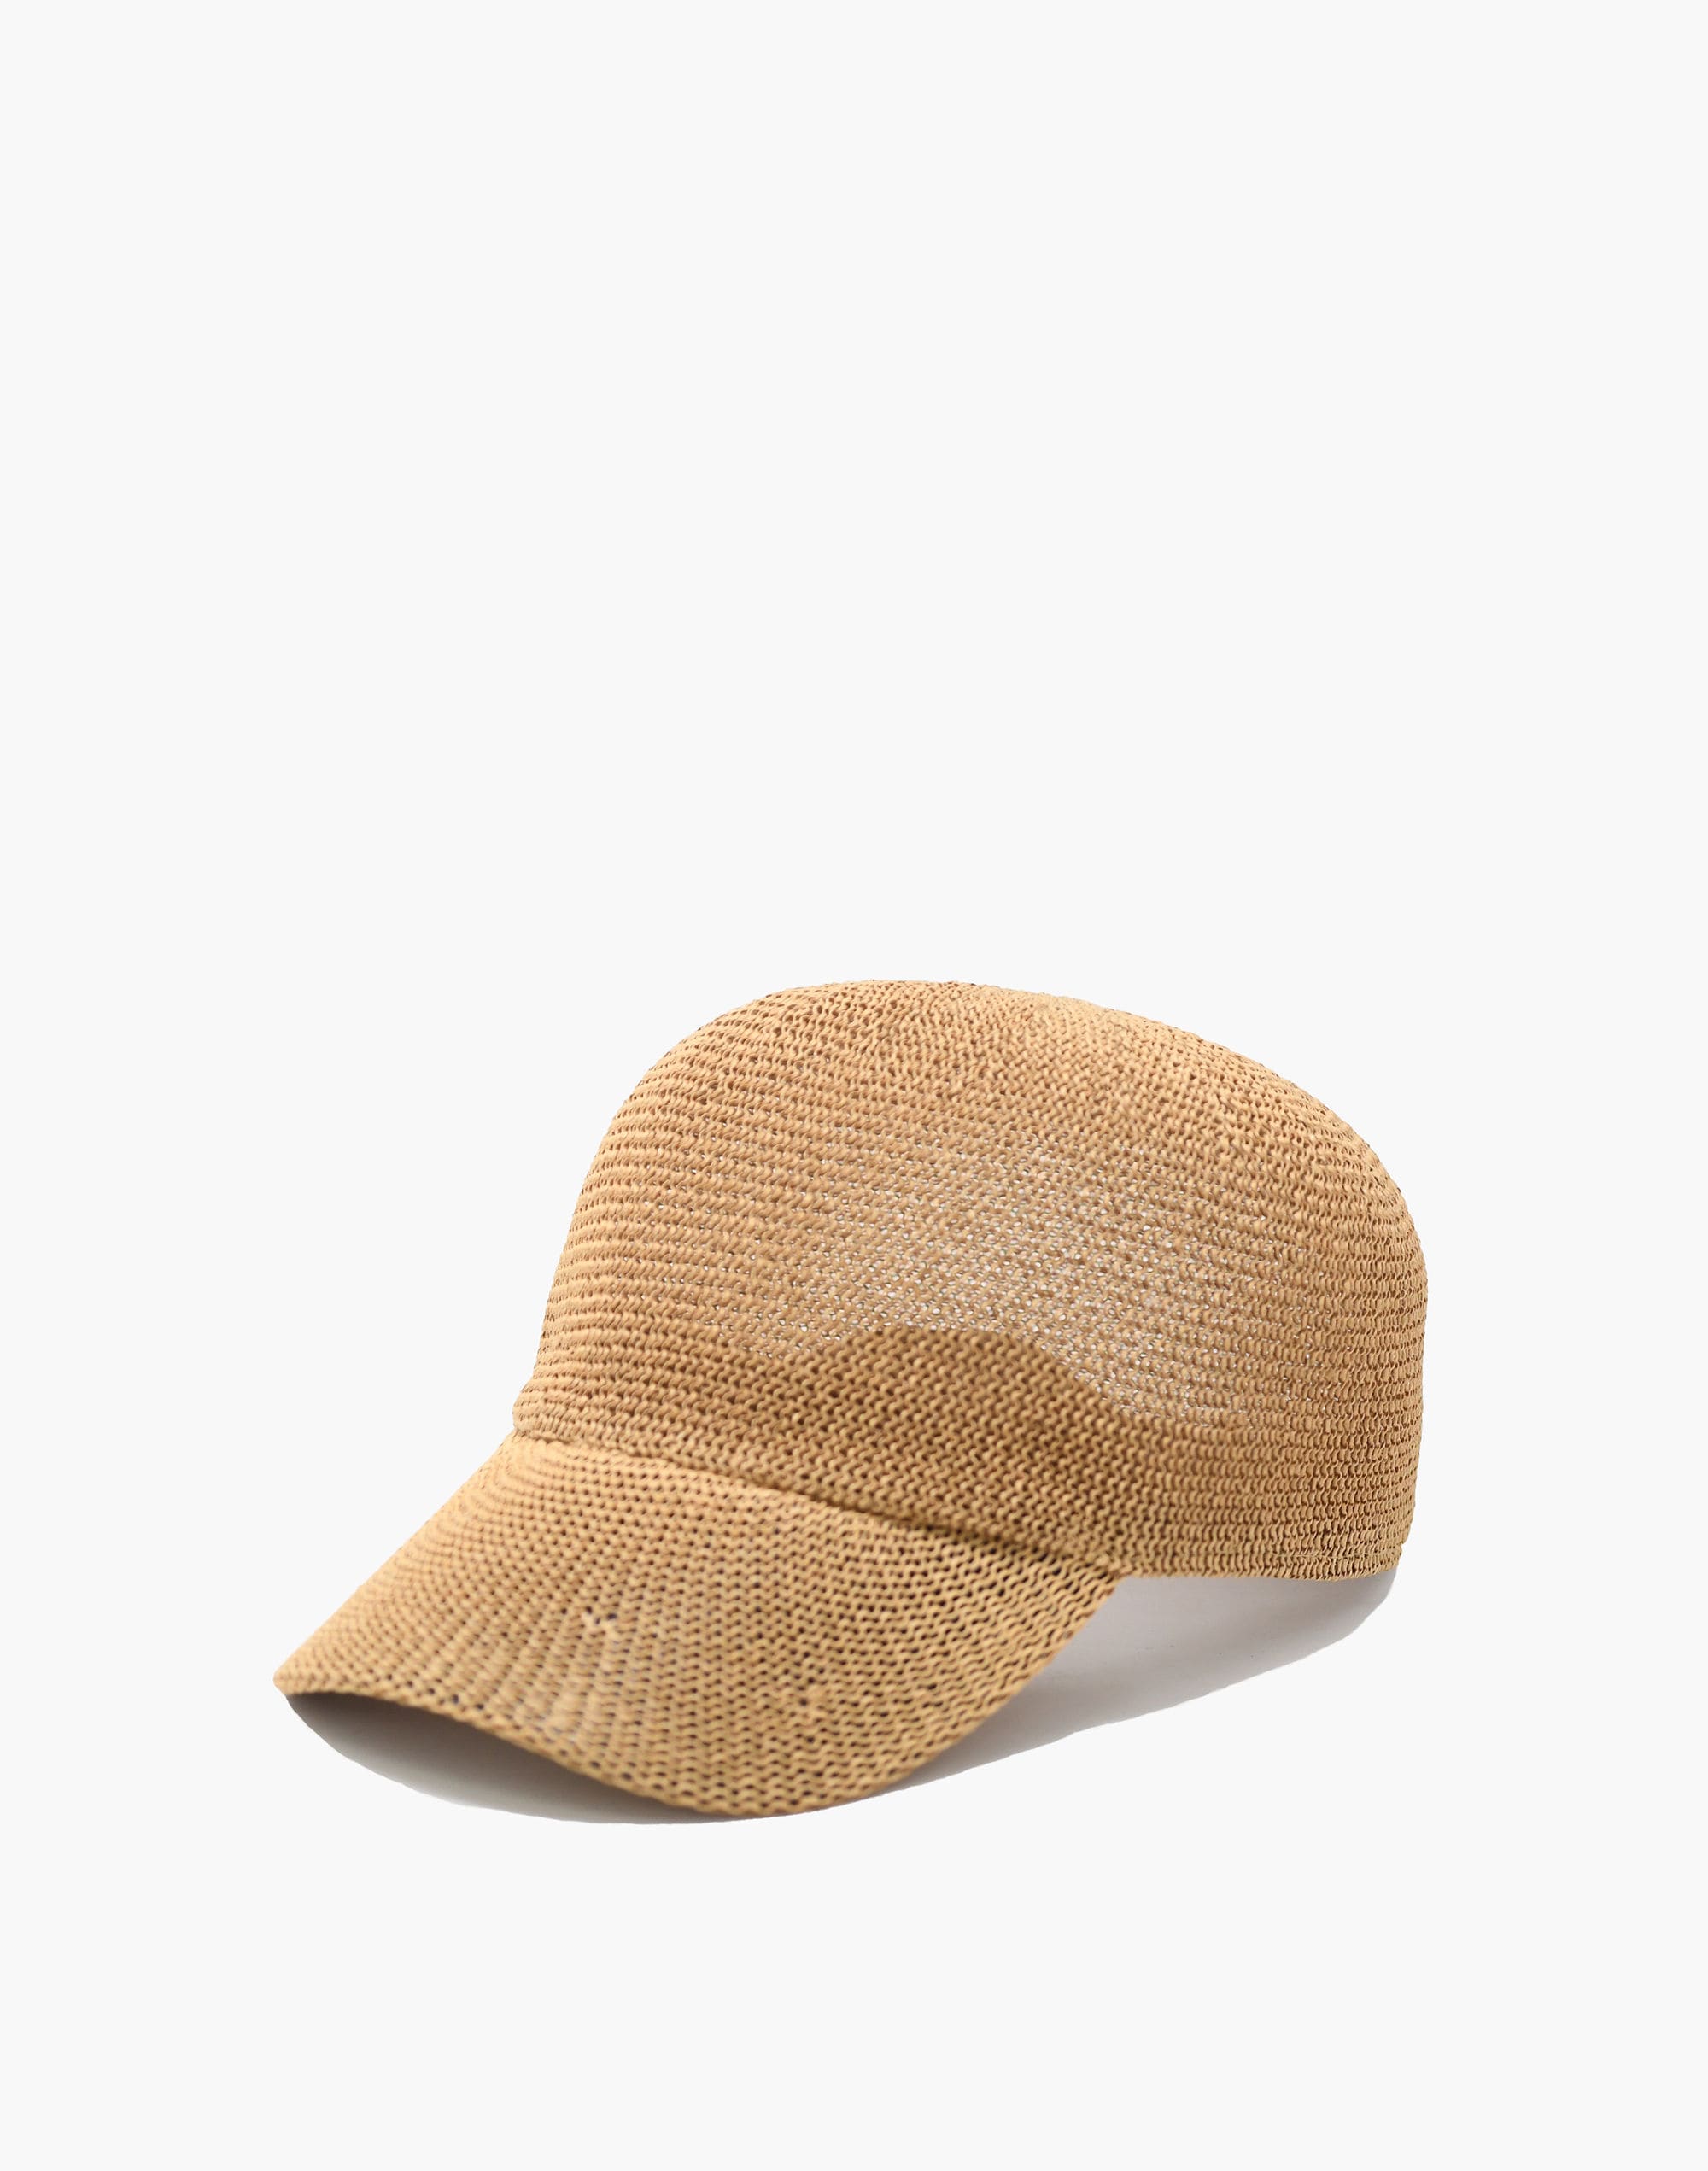 Urban Outfitters Straw Baseball Hat in Brown